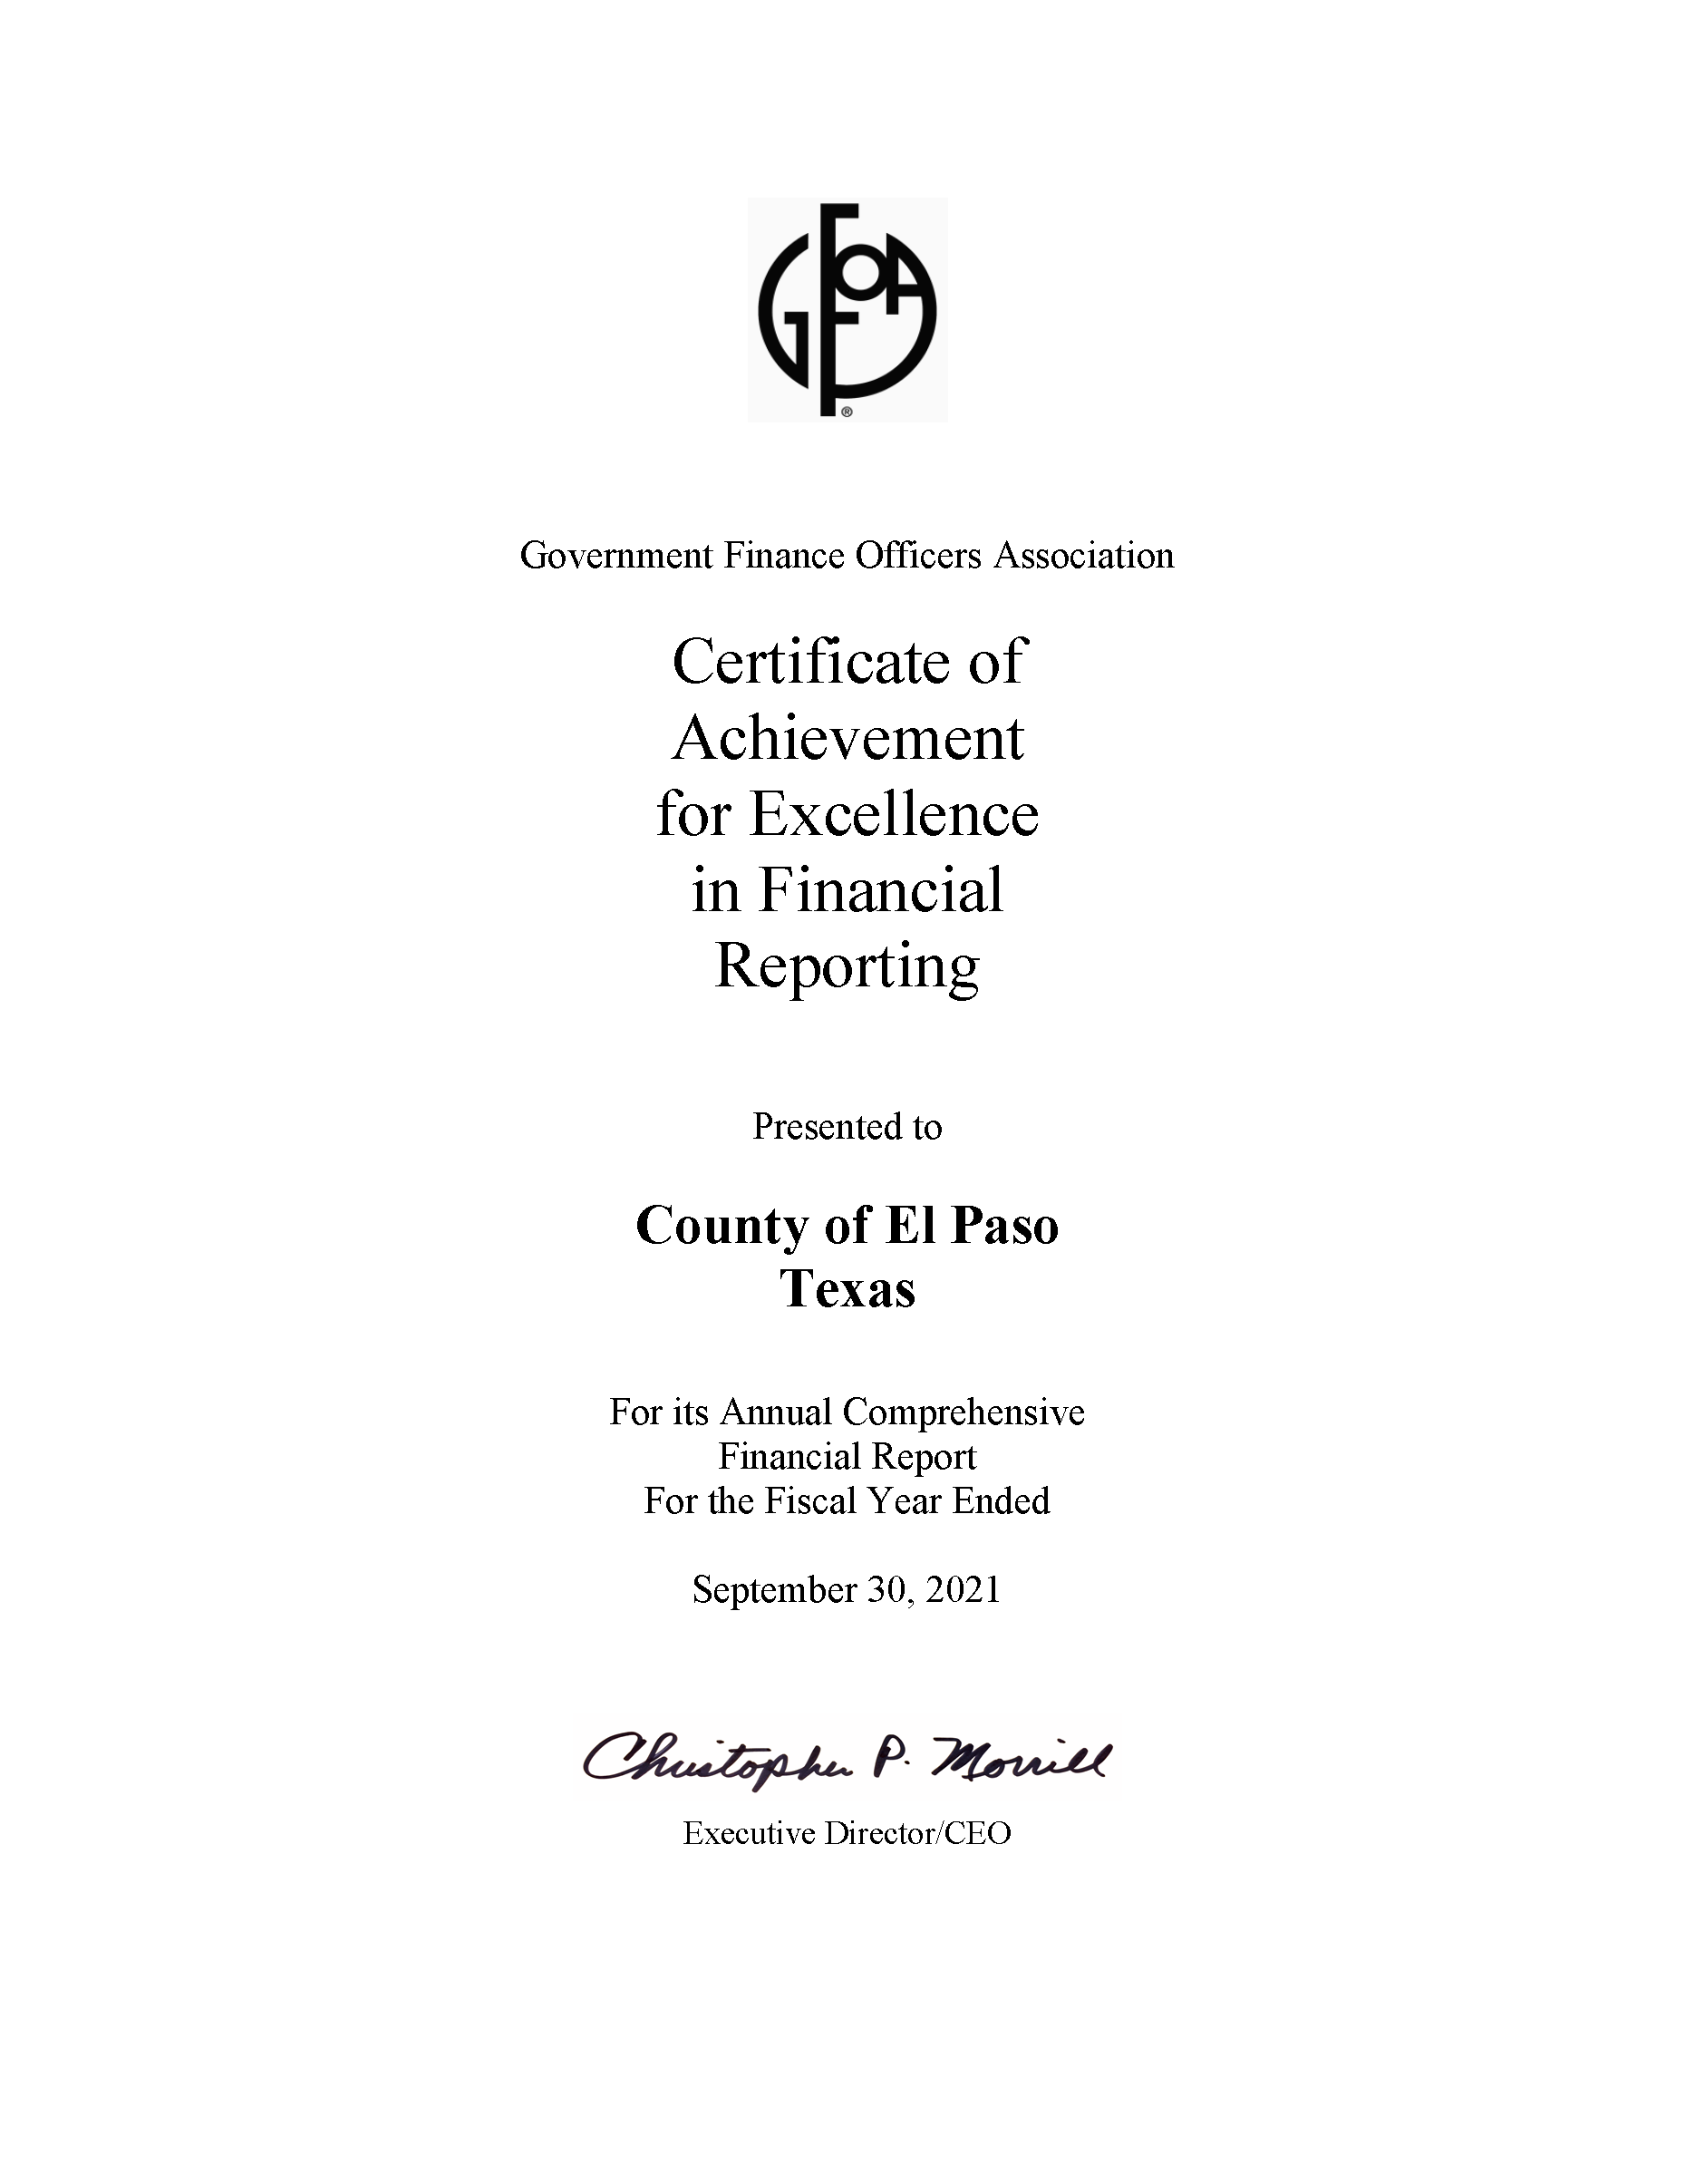 GFOA Excellence in Financial Reporting Certificate